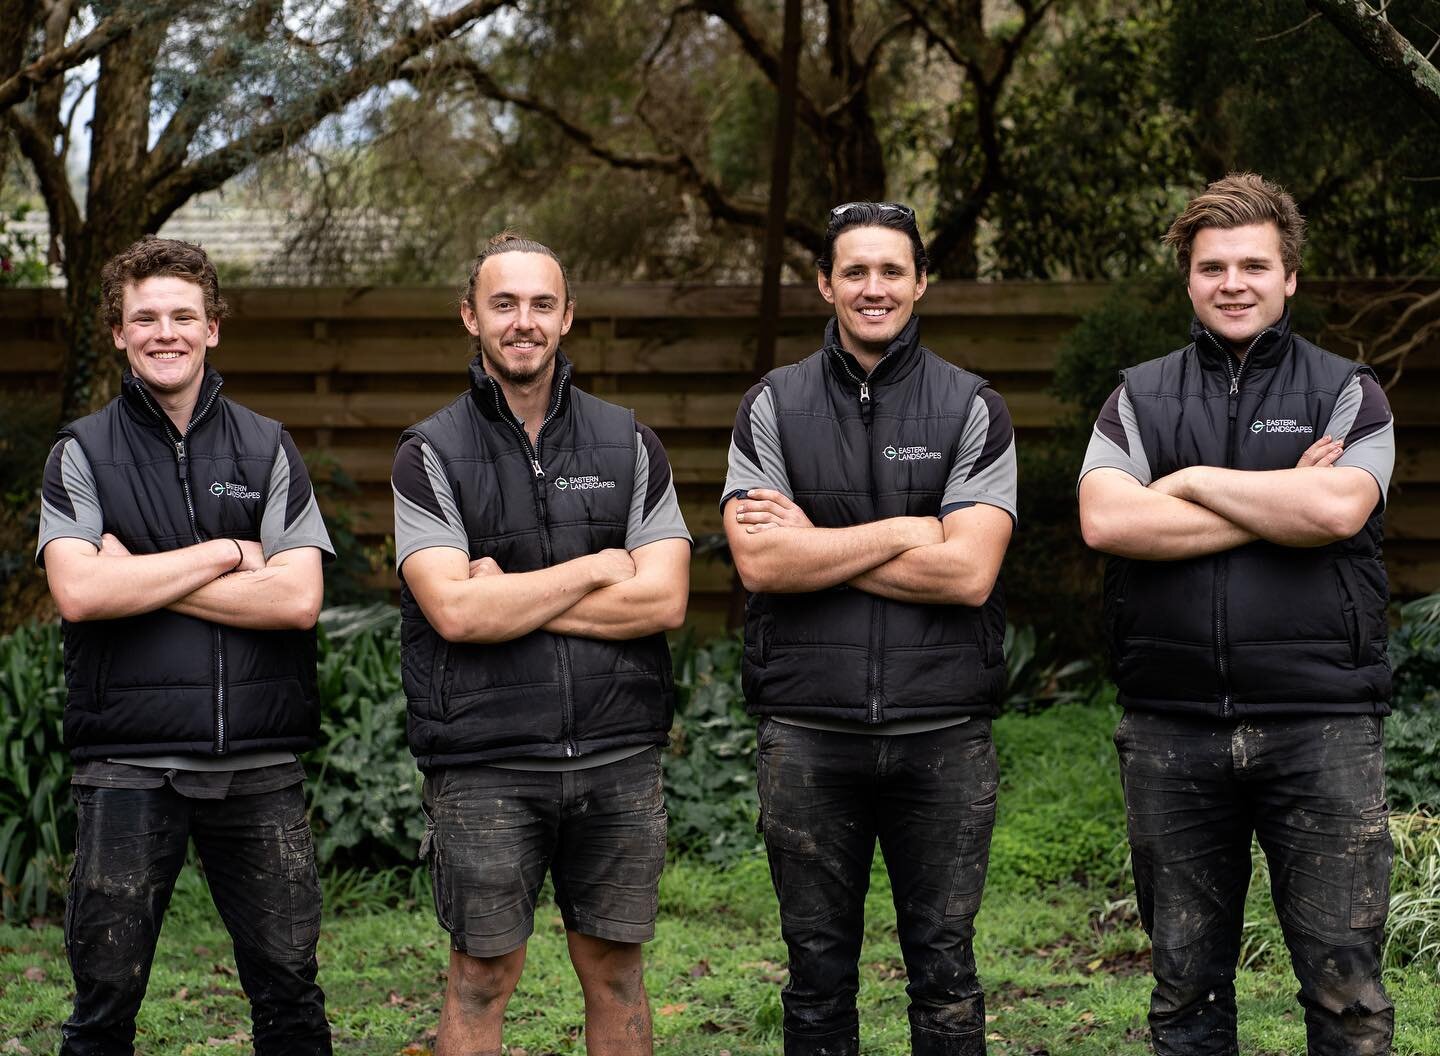 The Team 💪
Want to be a part of it? We are hiring! If you&rsquo;re interested please send your resume to info@easternlandscapes.com.au 
.
.
.
#landscaping #landscape #landscapedesign #garden #construction #gardening #gardendesign #landscaper #lawn #